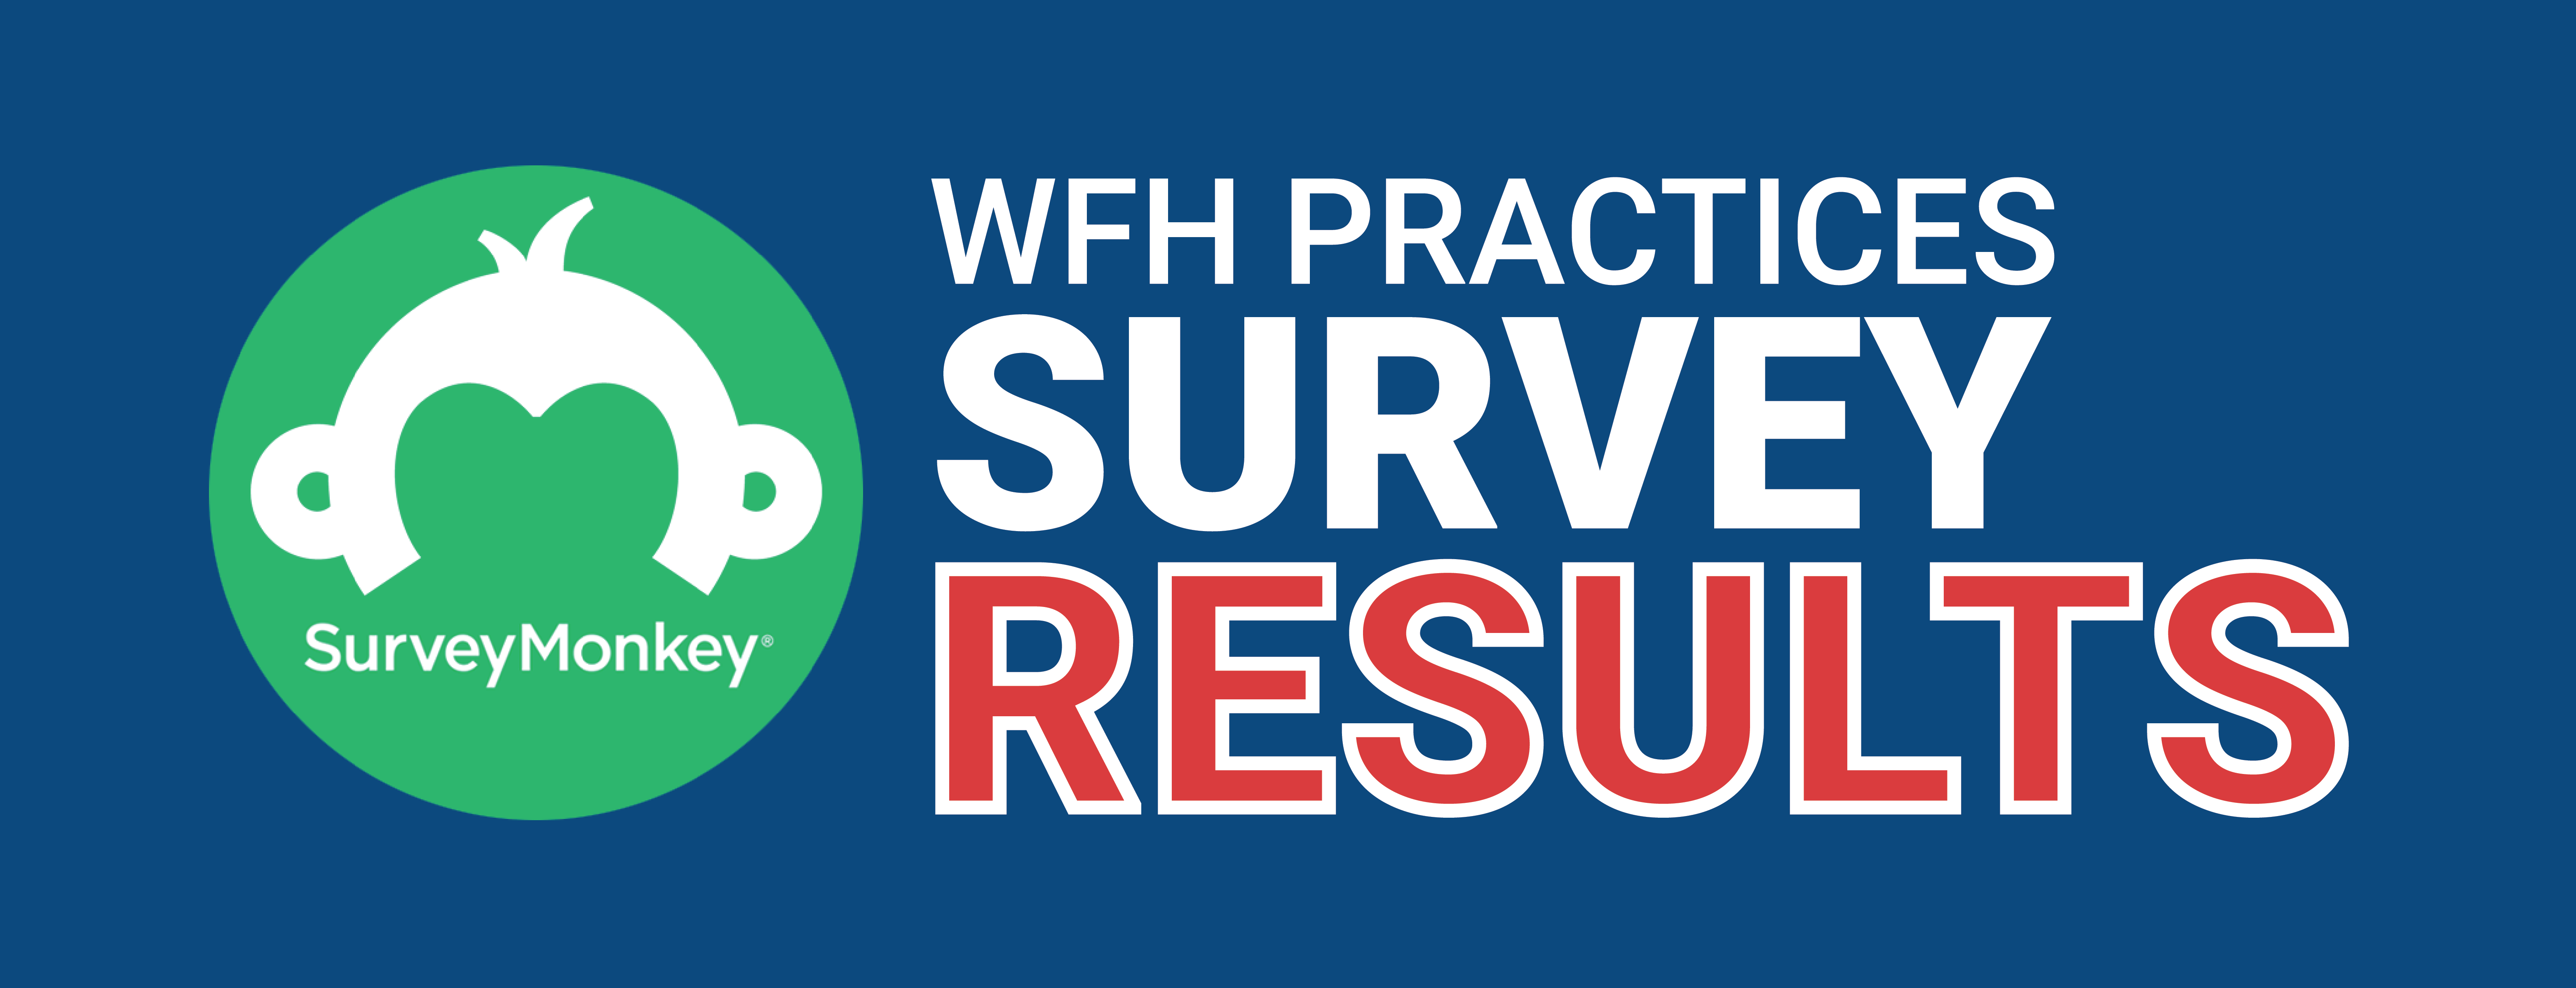 Work-from-Home (WFH) Practices Survey Results